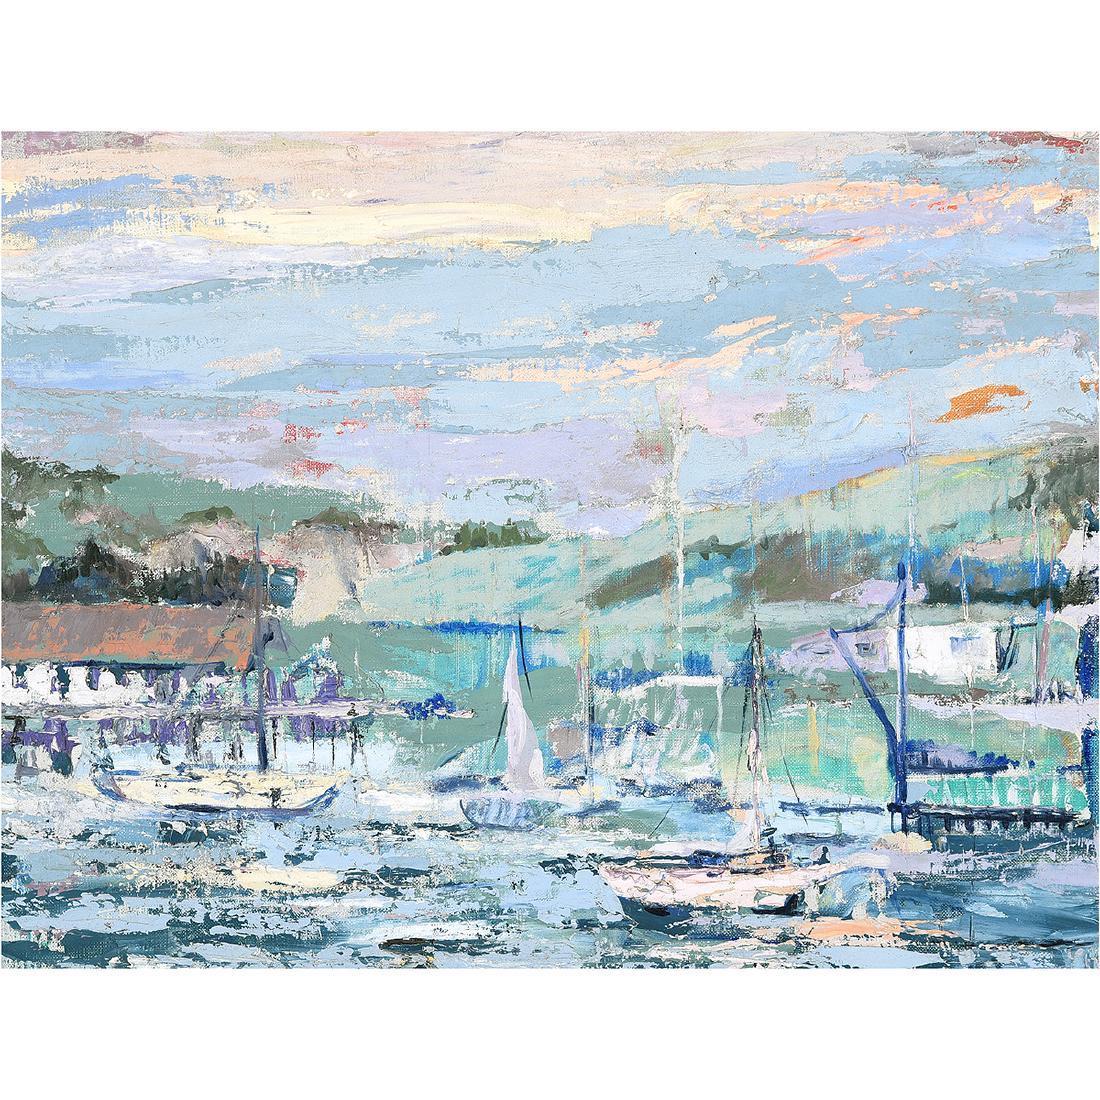 Unknown Landscape Painting - Harbor Scene with Sailboats Impressionist Seascape Oil Painting